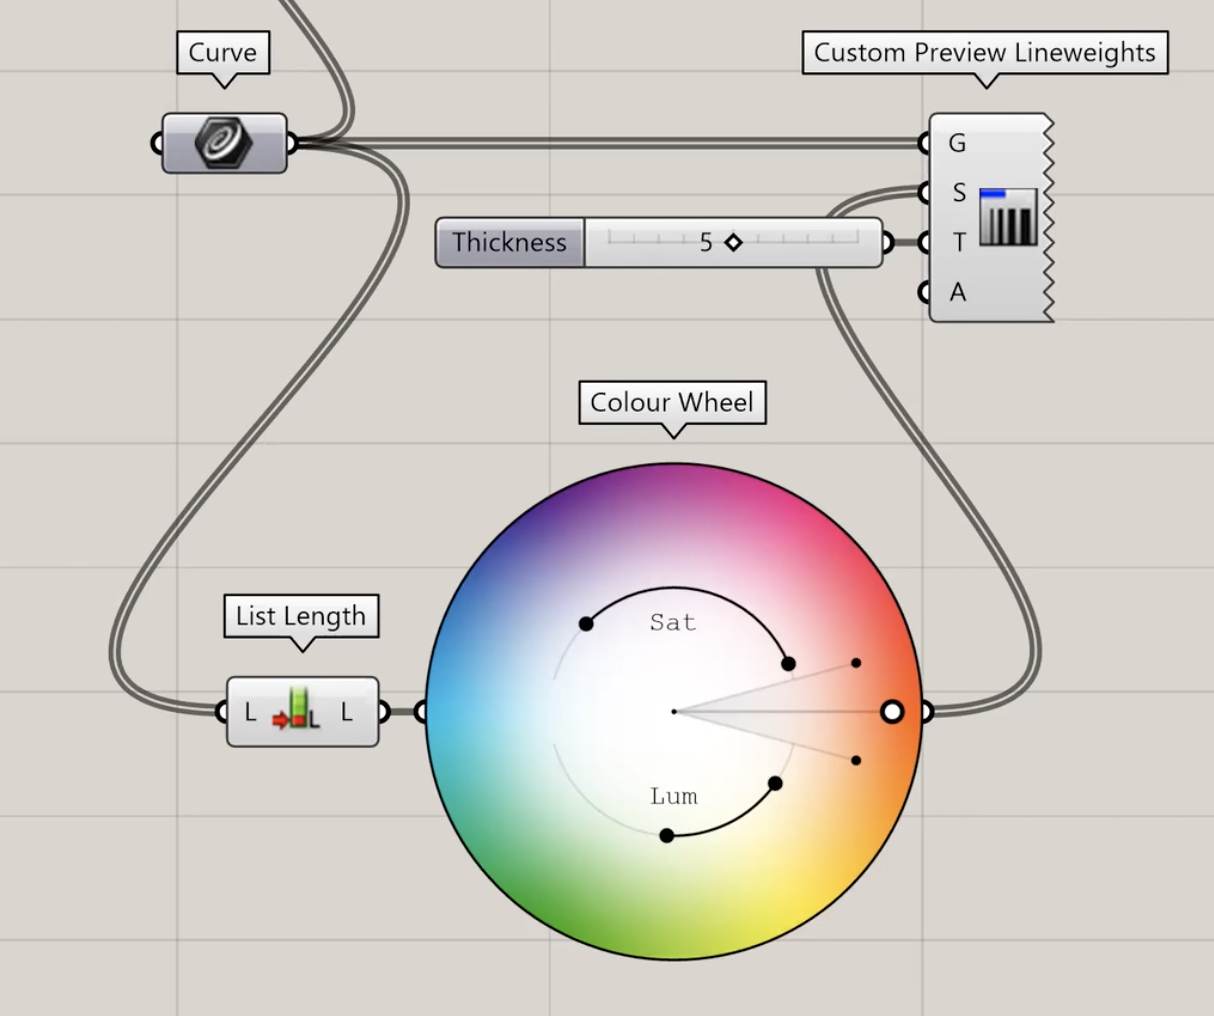 Colour Wheel + ListLenght help when we have a lot of curves for see them. Don”t need to duplicate curve and the previews fonction. 